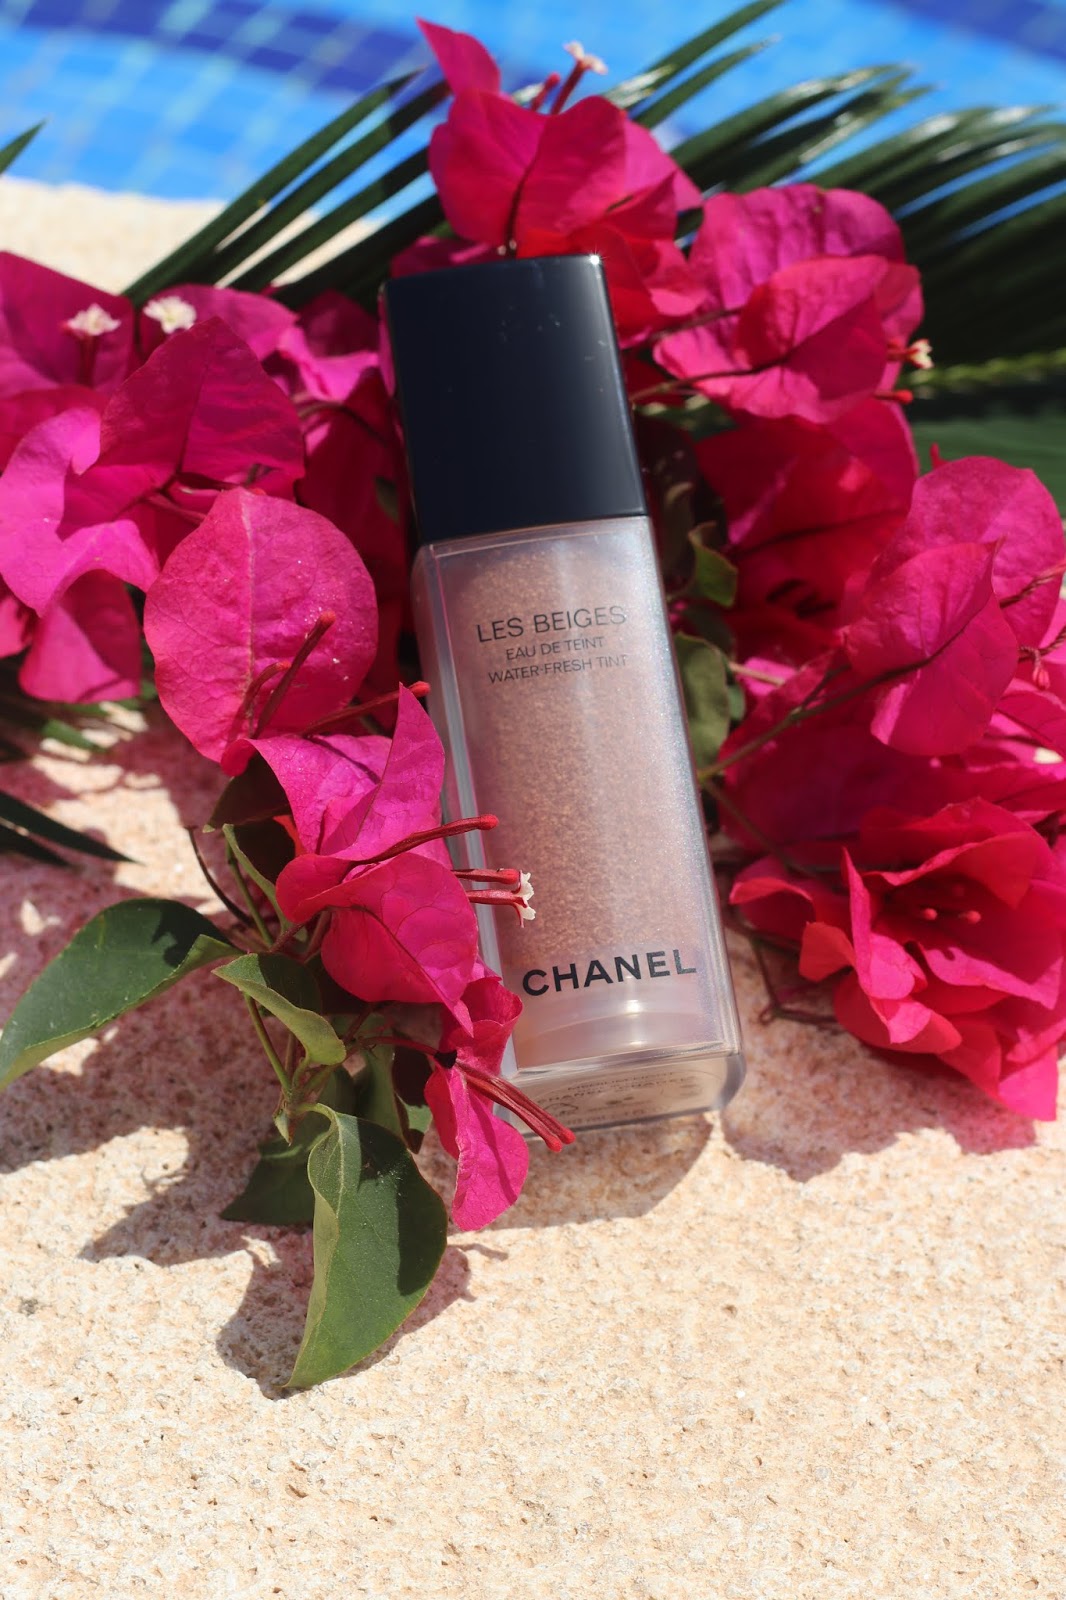 Chanel Les Beiges Water Fresh Tint